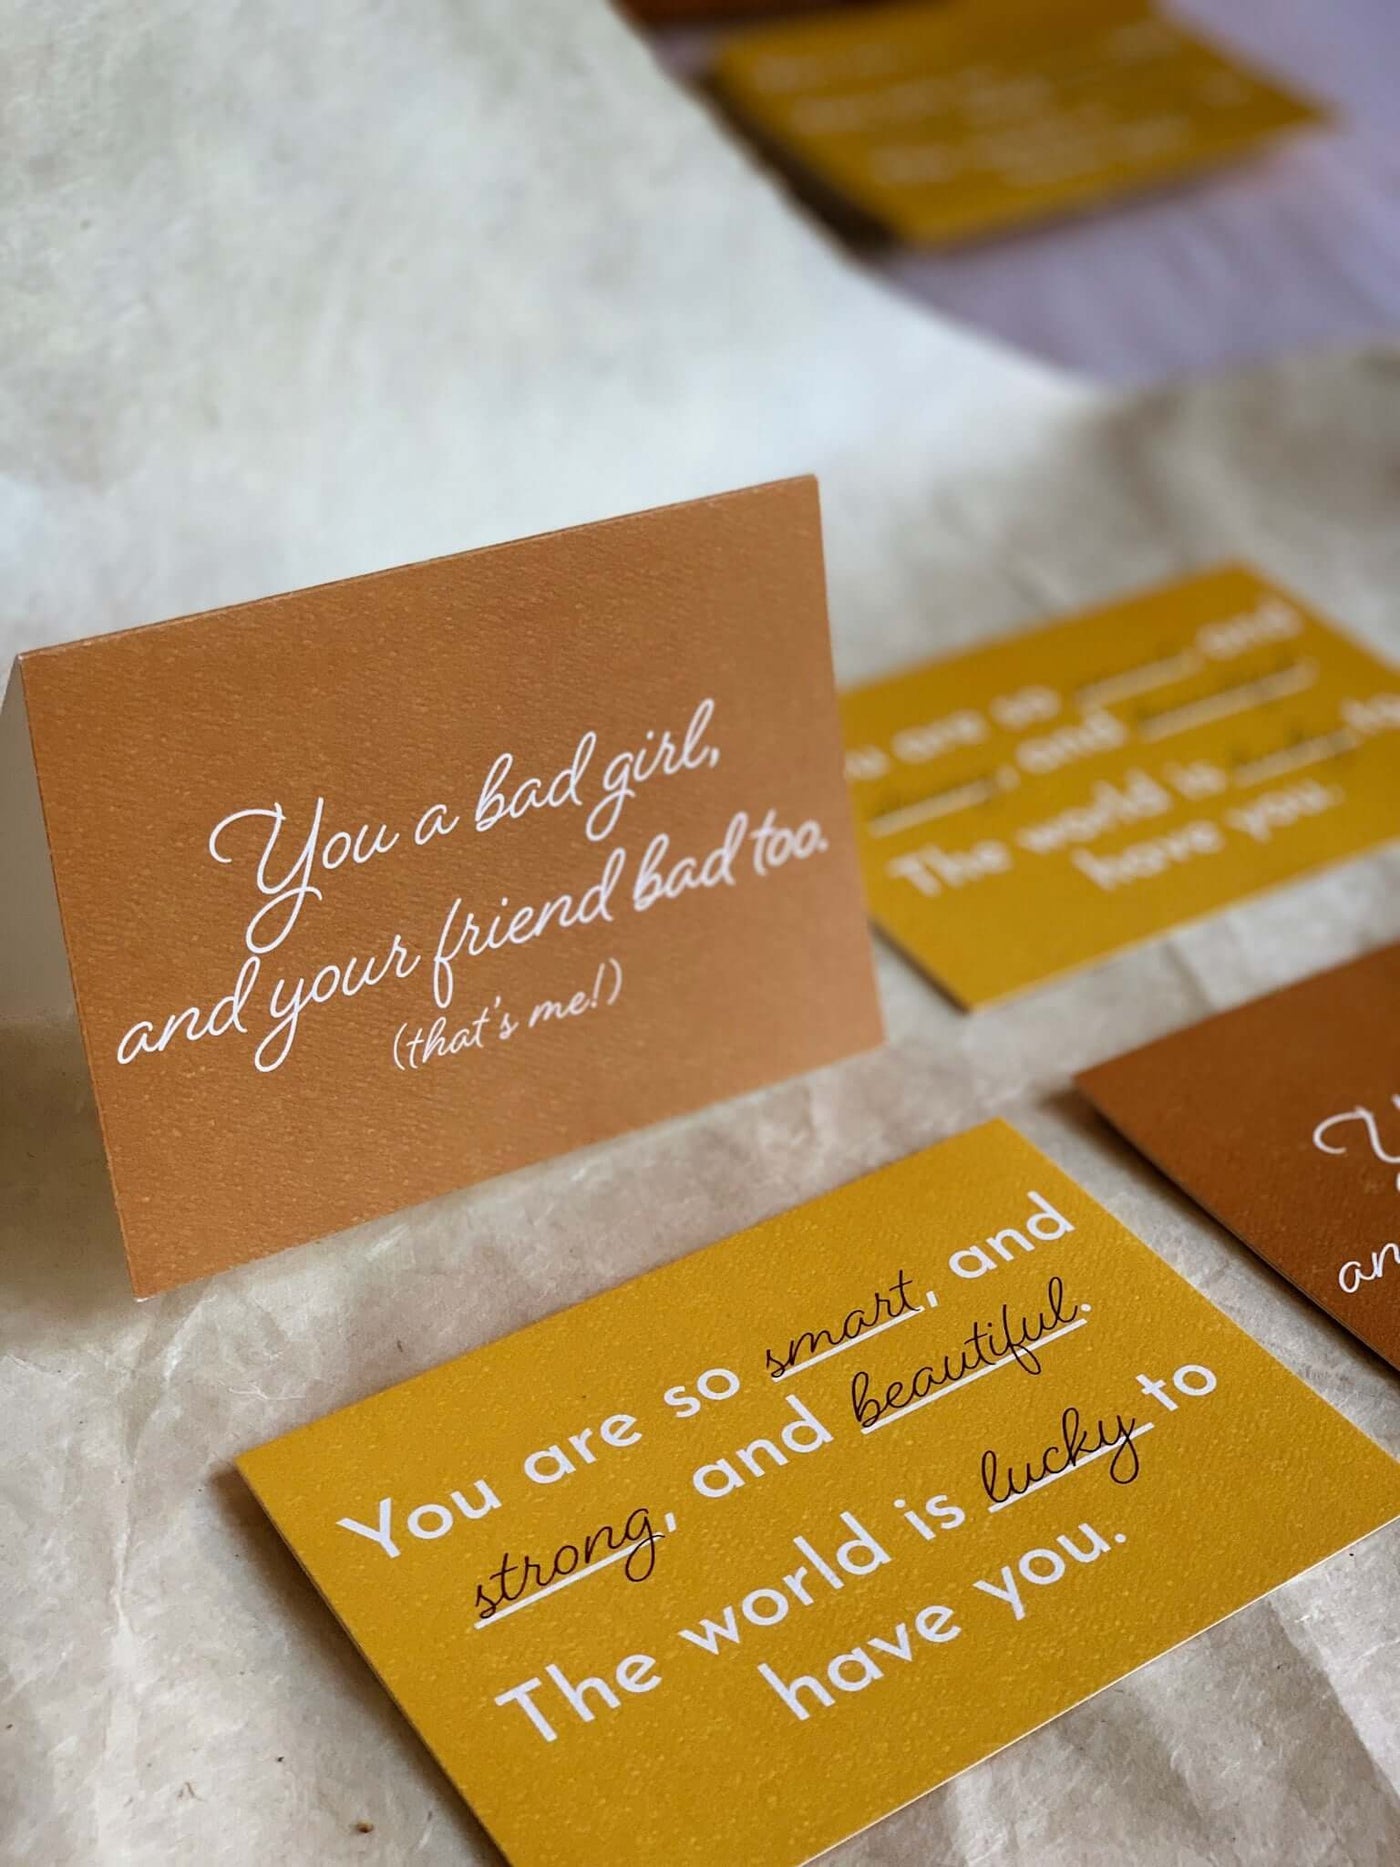 Orange card with a white cursive text that reads 'You a bad girl, and your friend bad too. (that's me!)" and a Yellow card featuring text that says "You are so smart, strong, and beautiful. The world is lucky to have you."